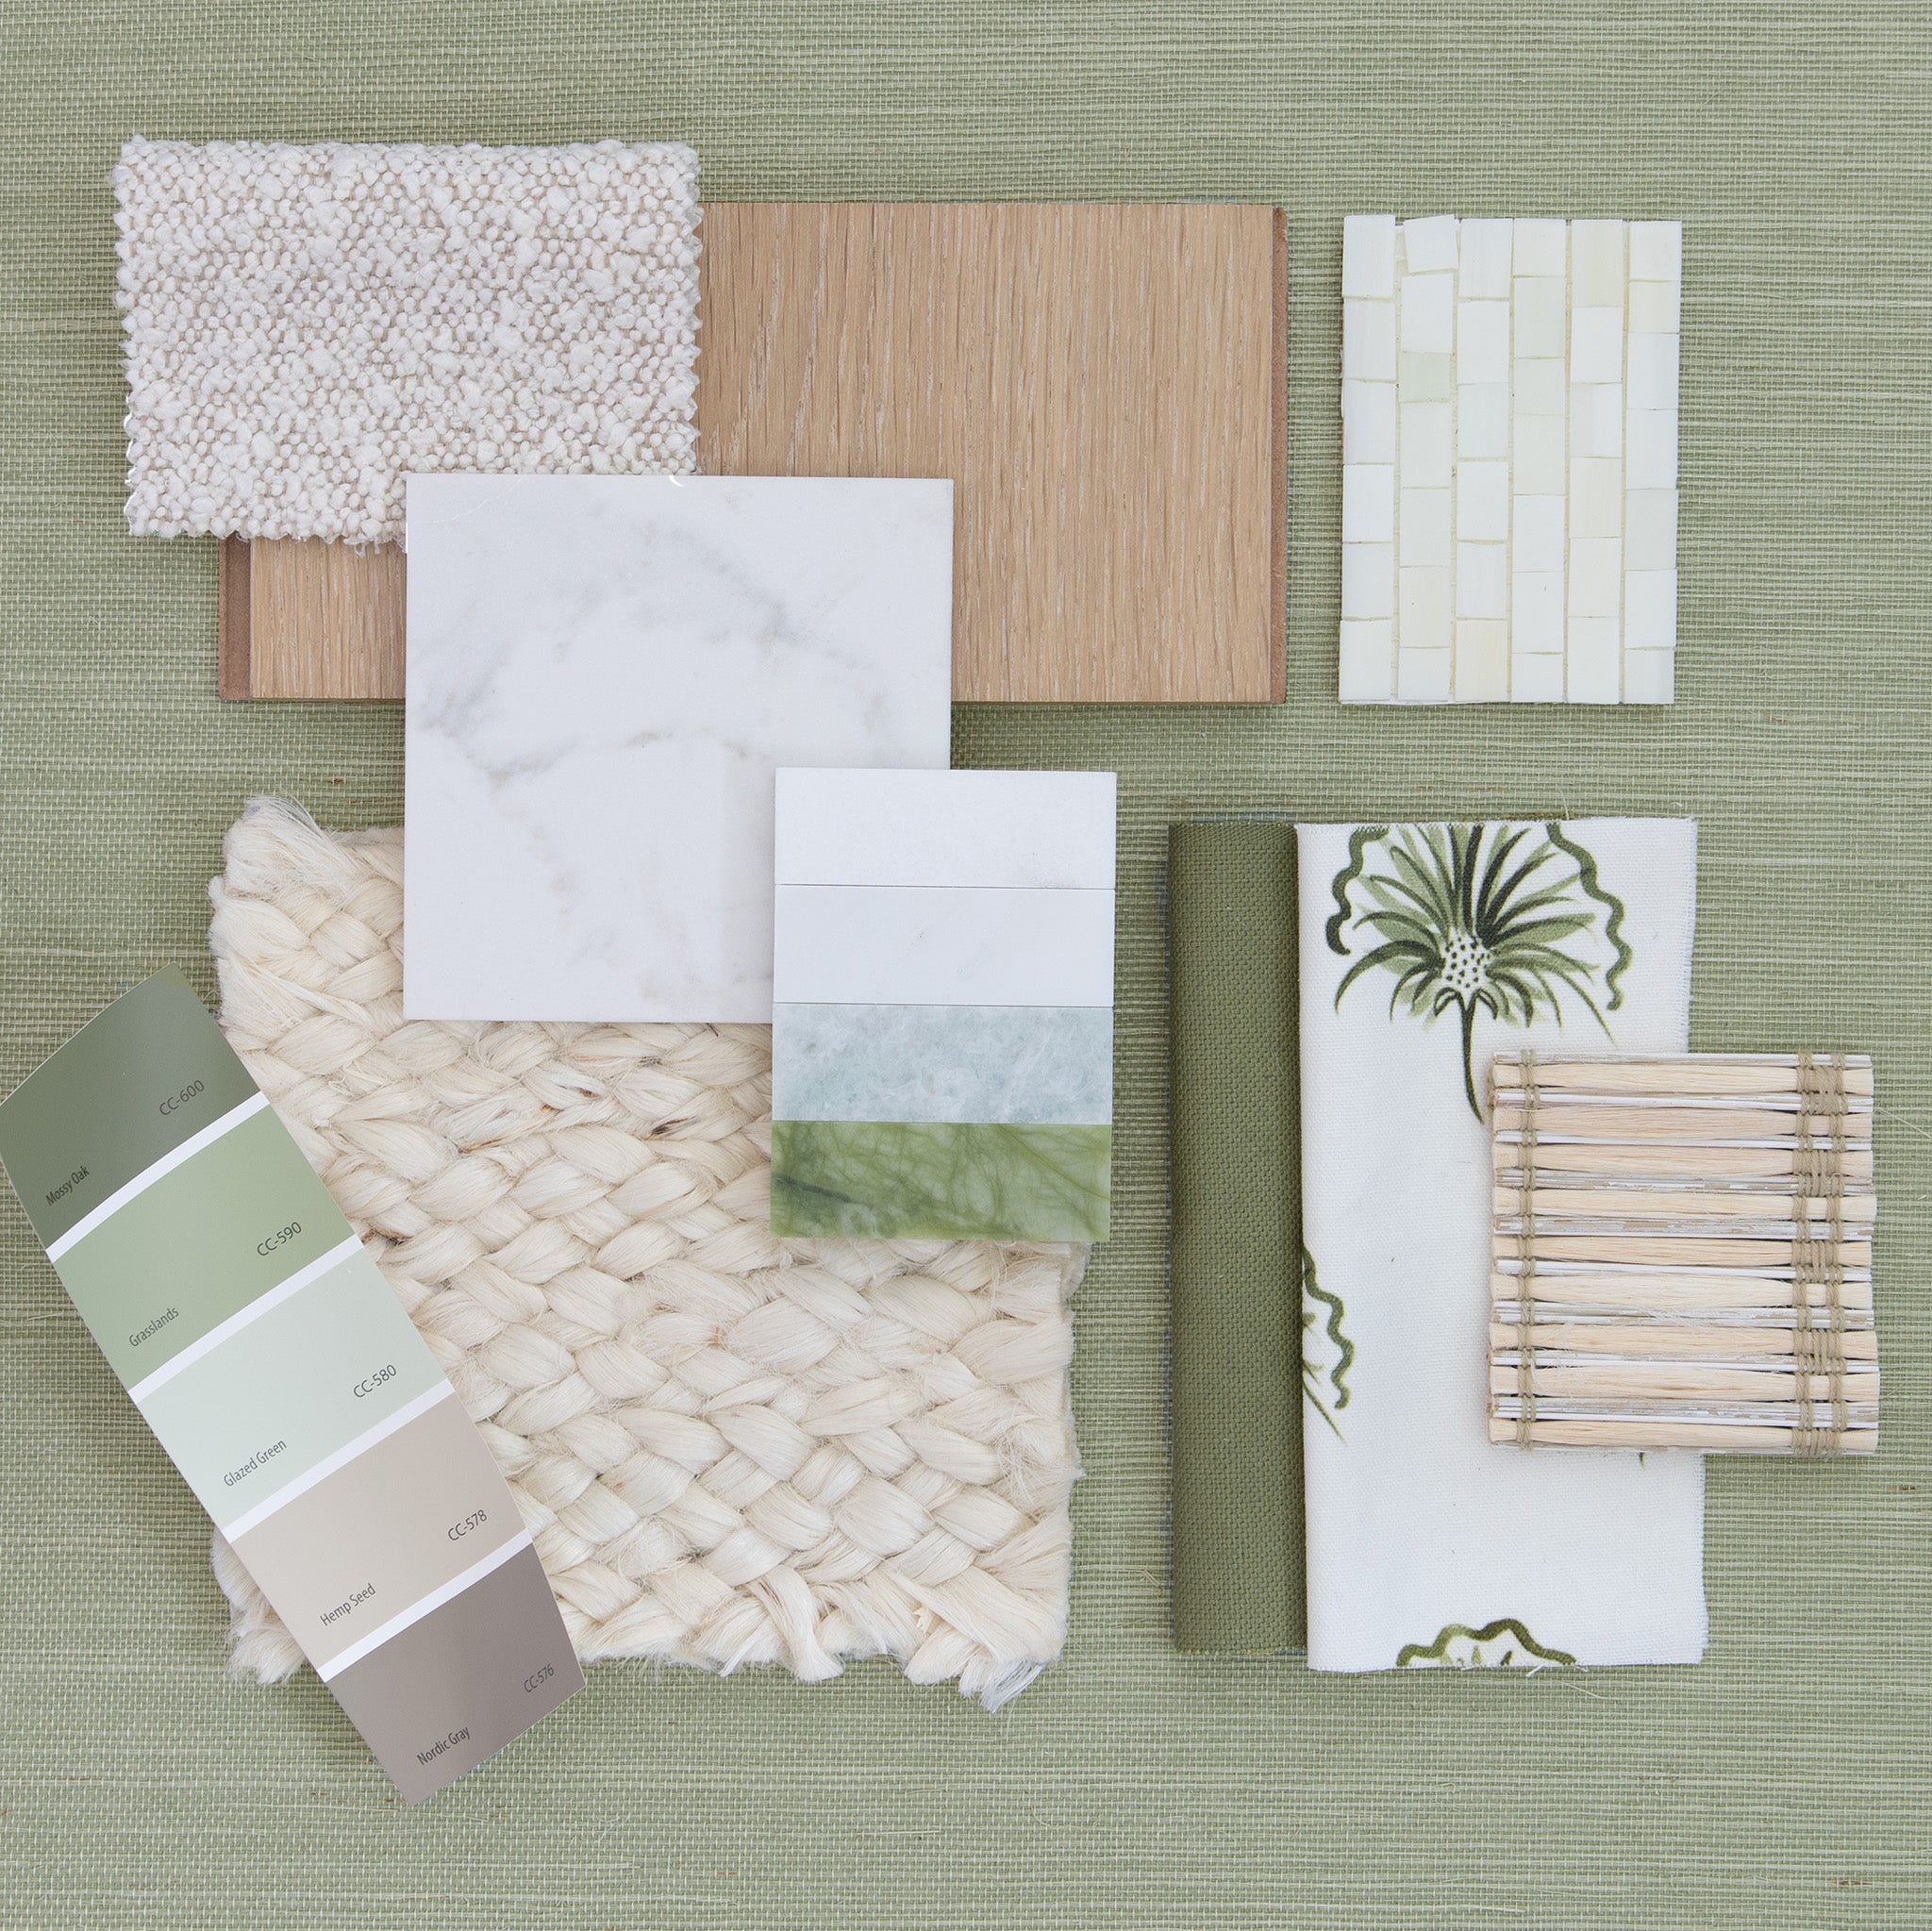 Interior design moodboard with green solid grasscloth wallpaper paired with green geometric fabric and cream accents